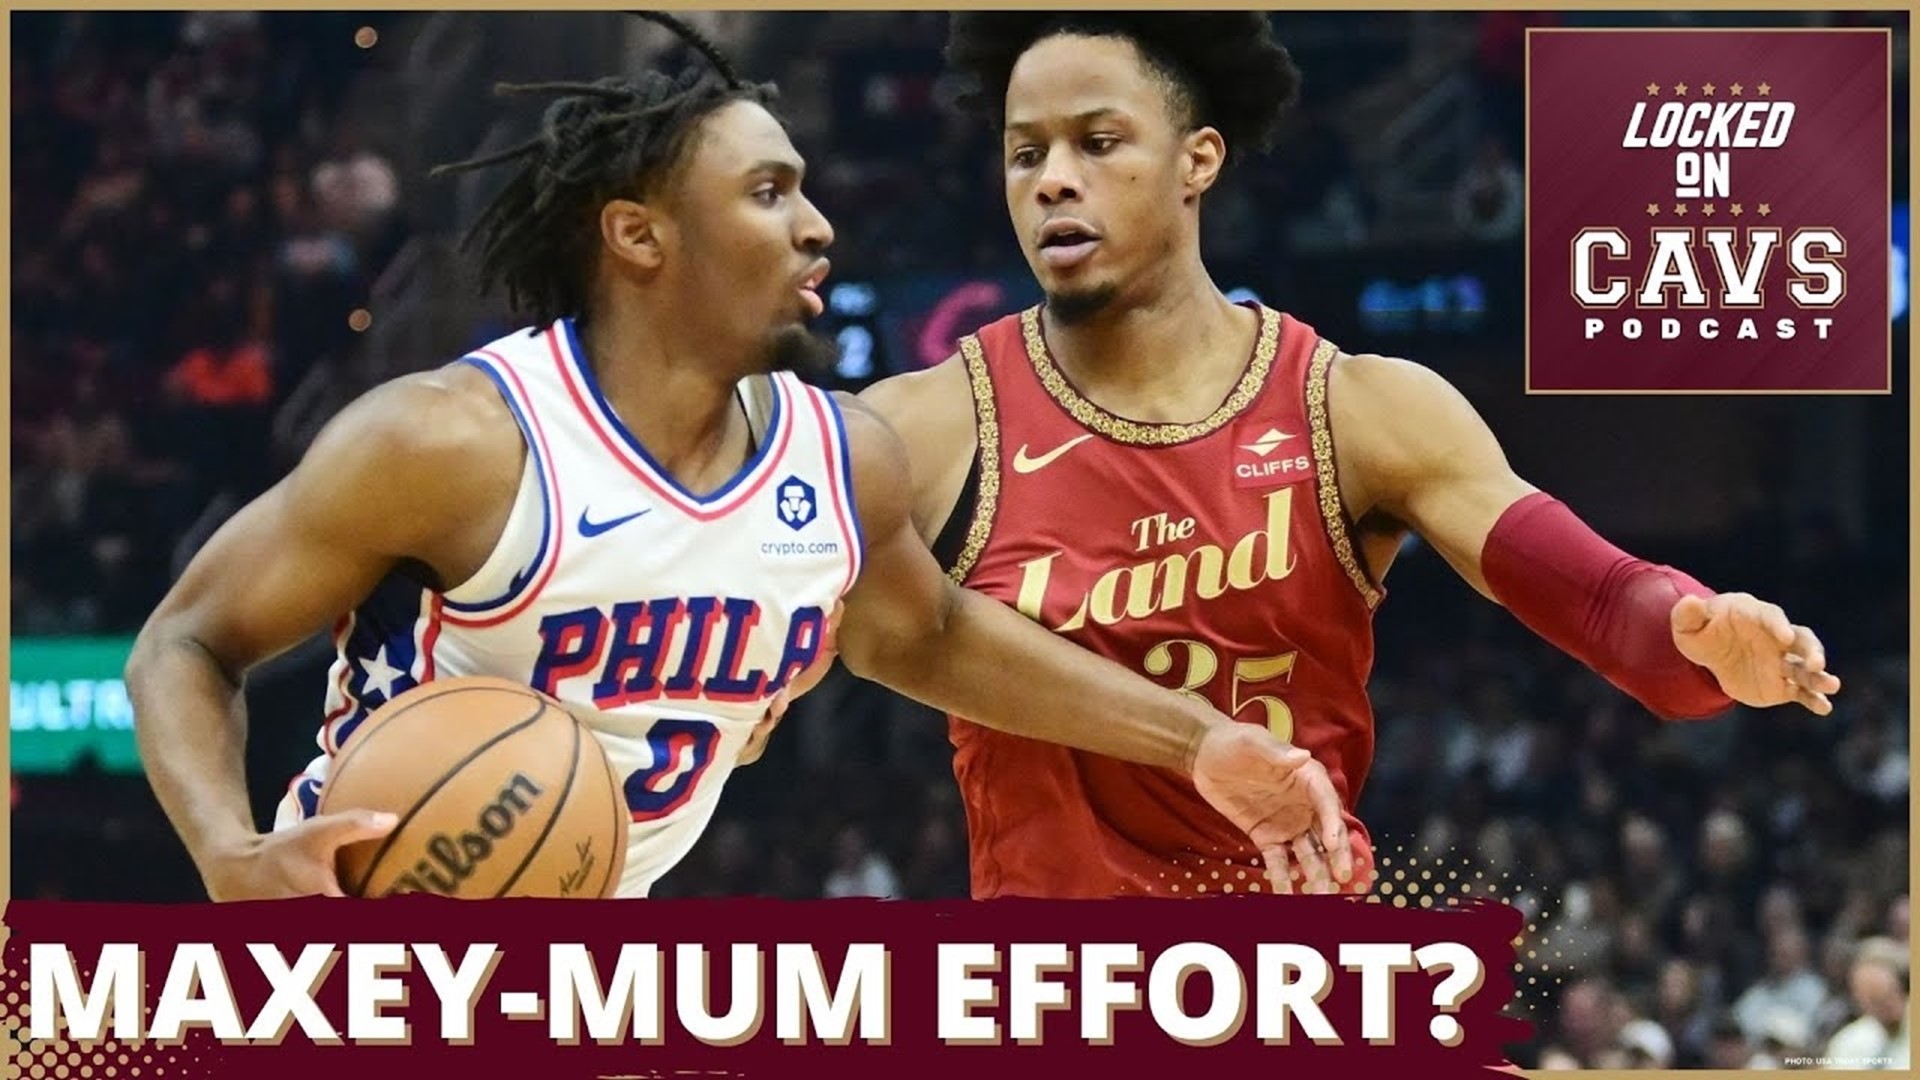 The Cleveland Cavaliers are set to face Tyrese Maxey and the Philadelphia 76ers as both teams limp to the finish line of the season.